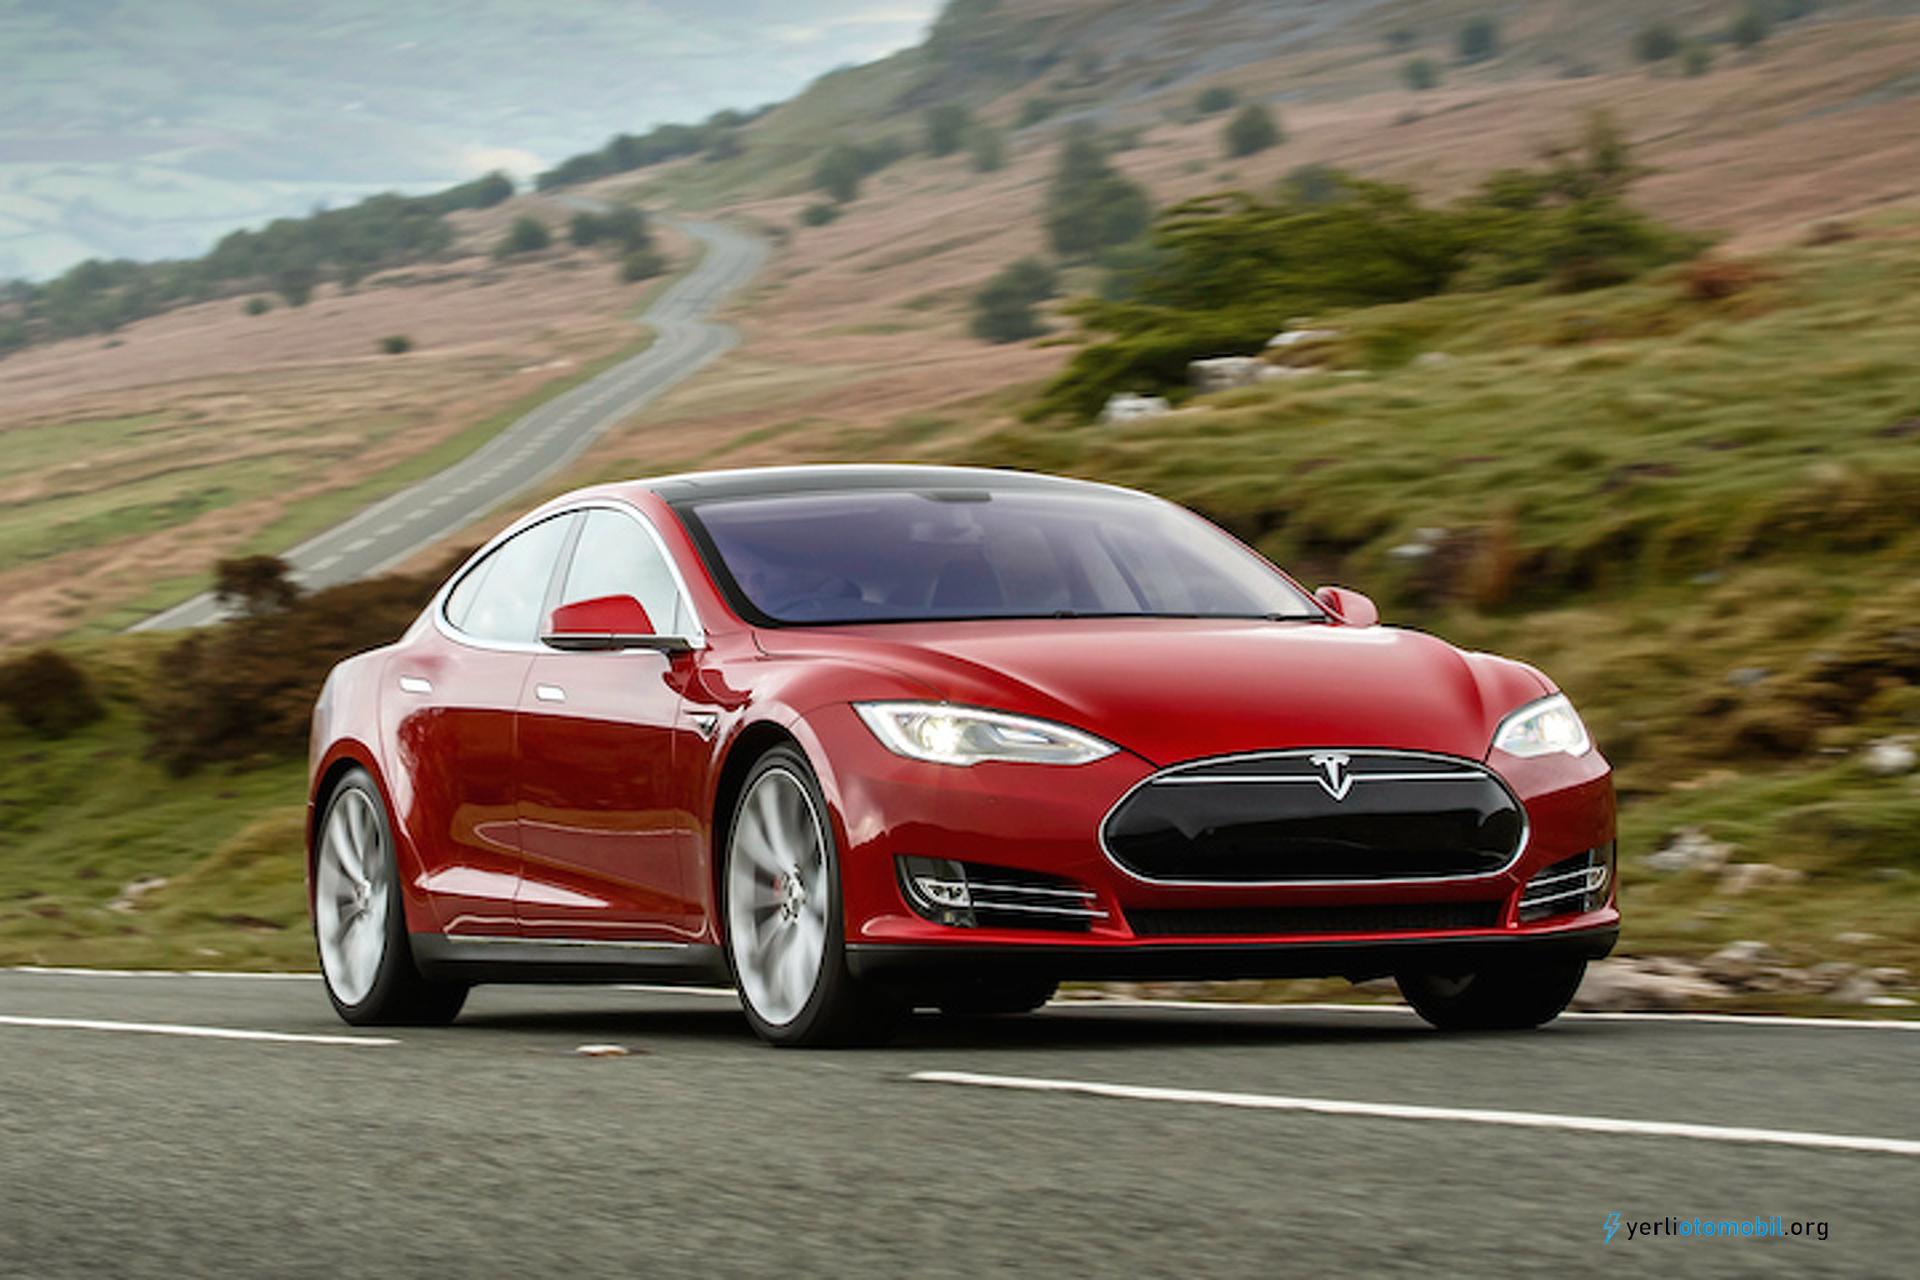 tesla-may-sell-its-50000th-model-s-by-the-end-of-the-month.jpg